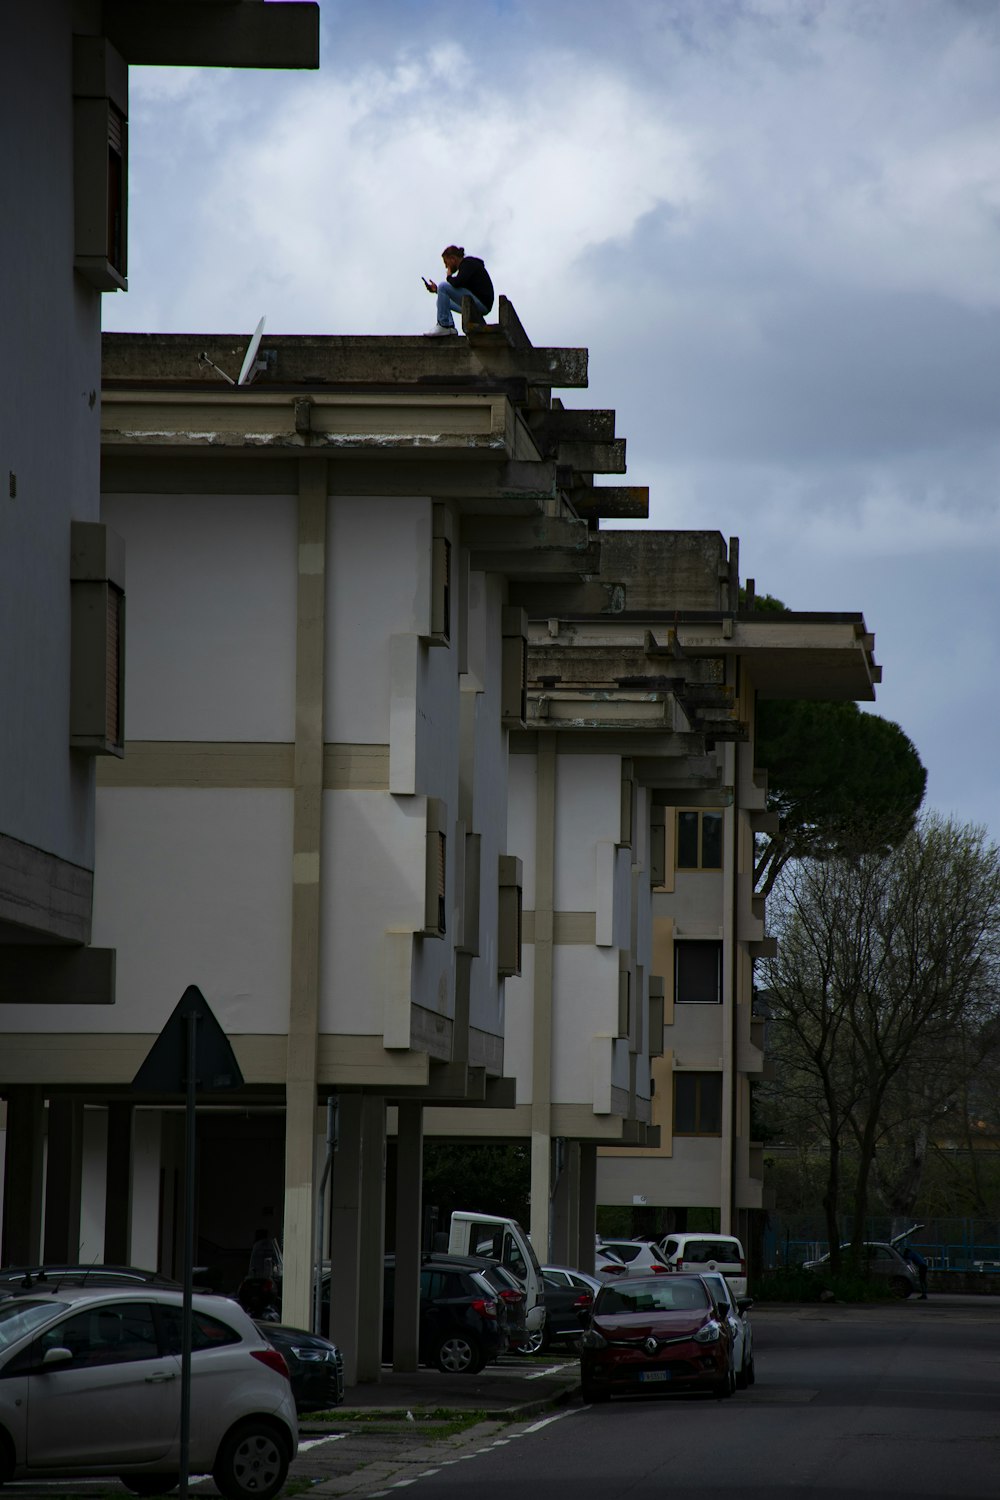 a person on top of a building